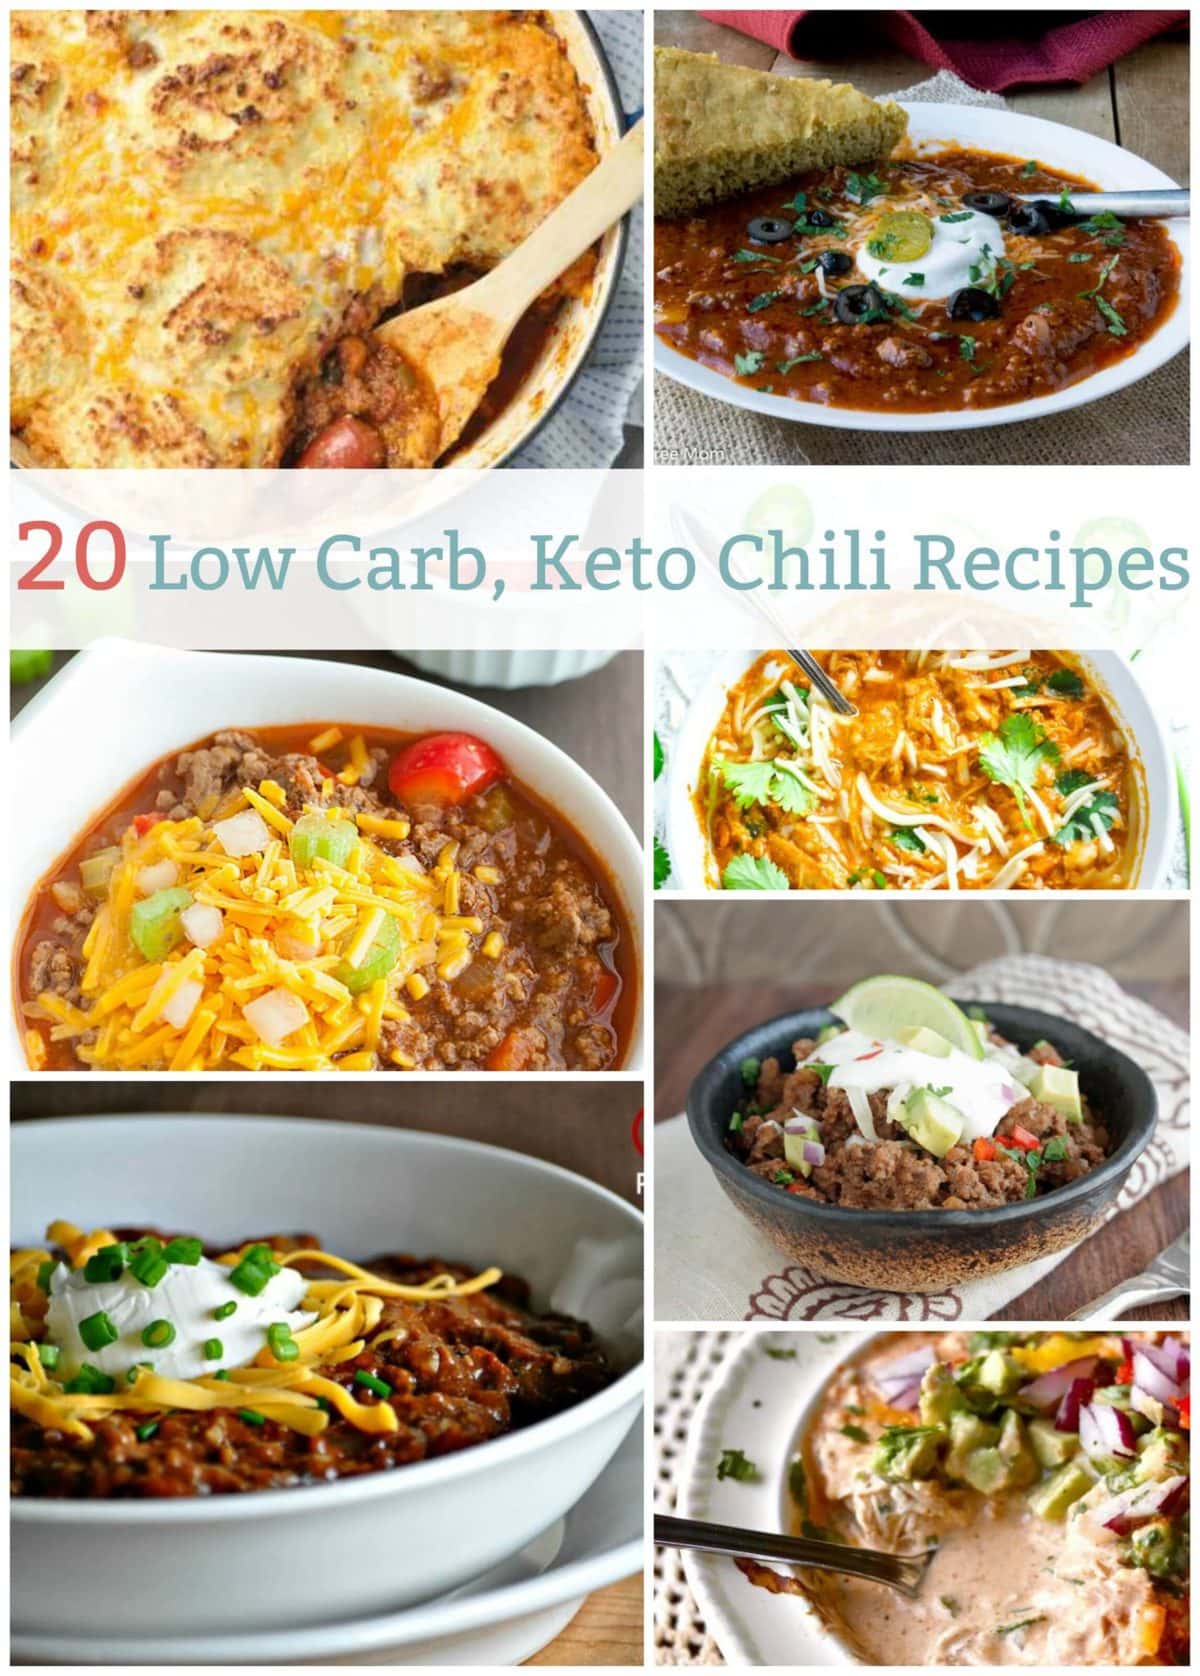 20 Low Carb Keto Chili Recipes | Peace Love and Low Carb